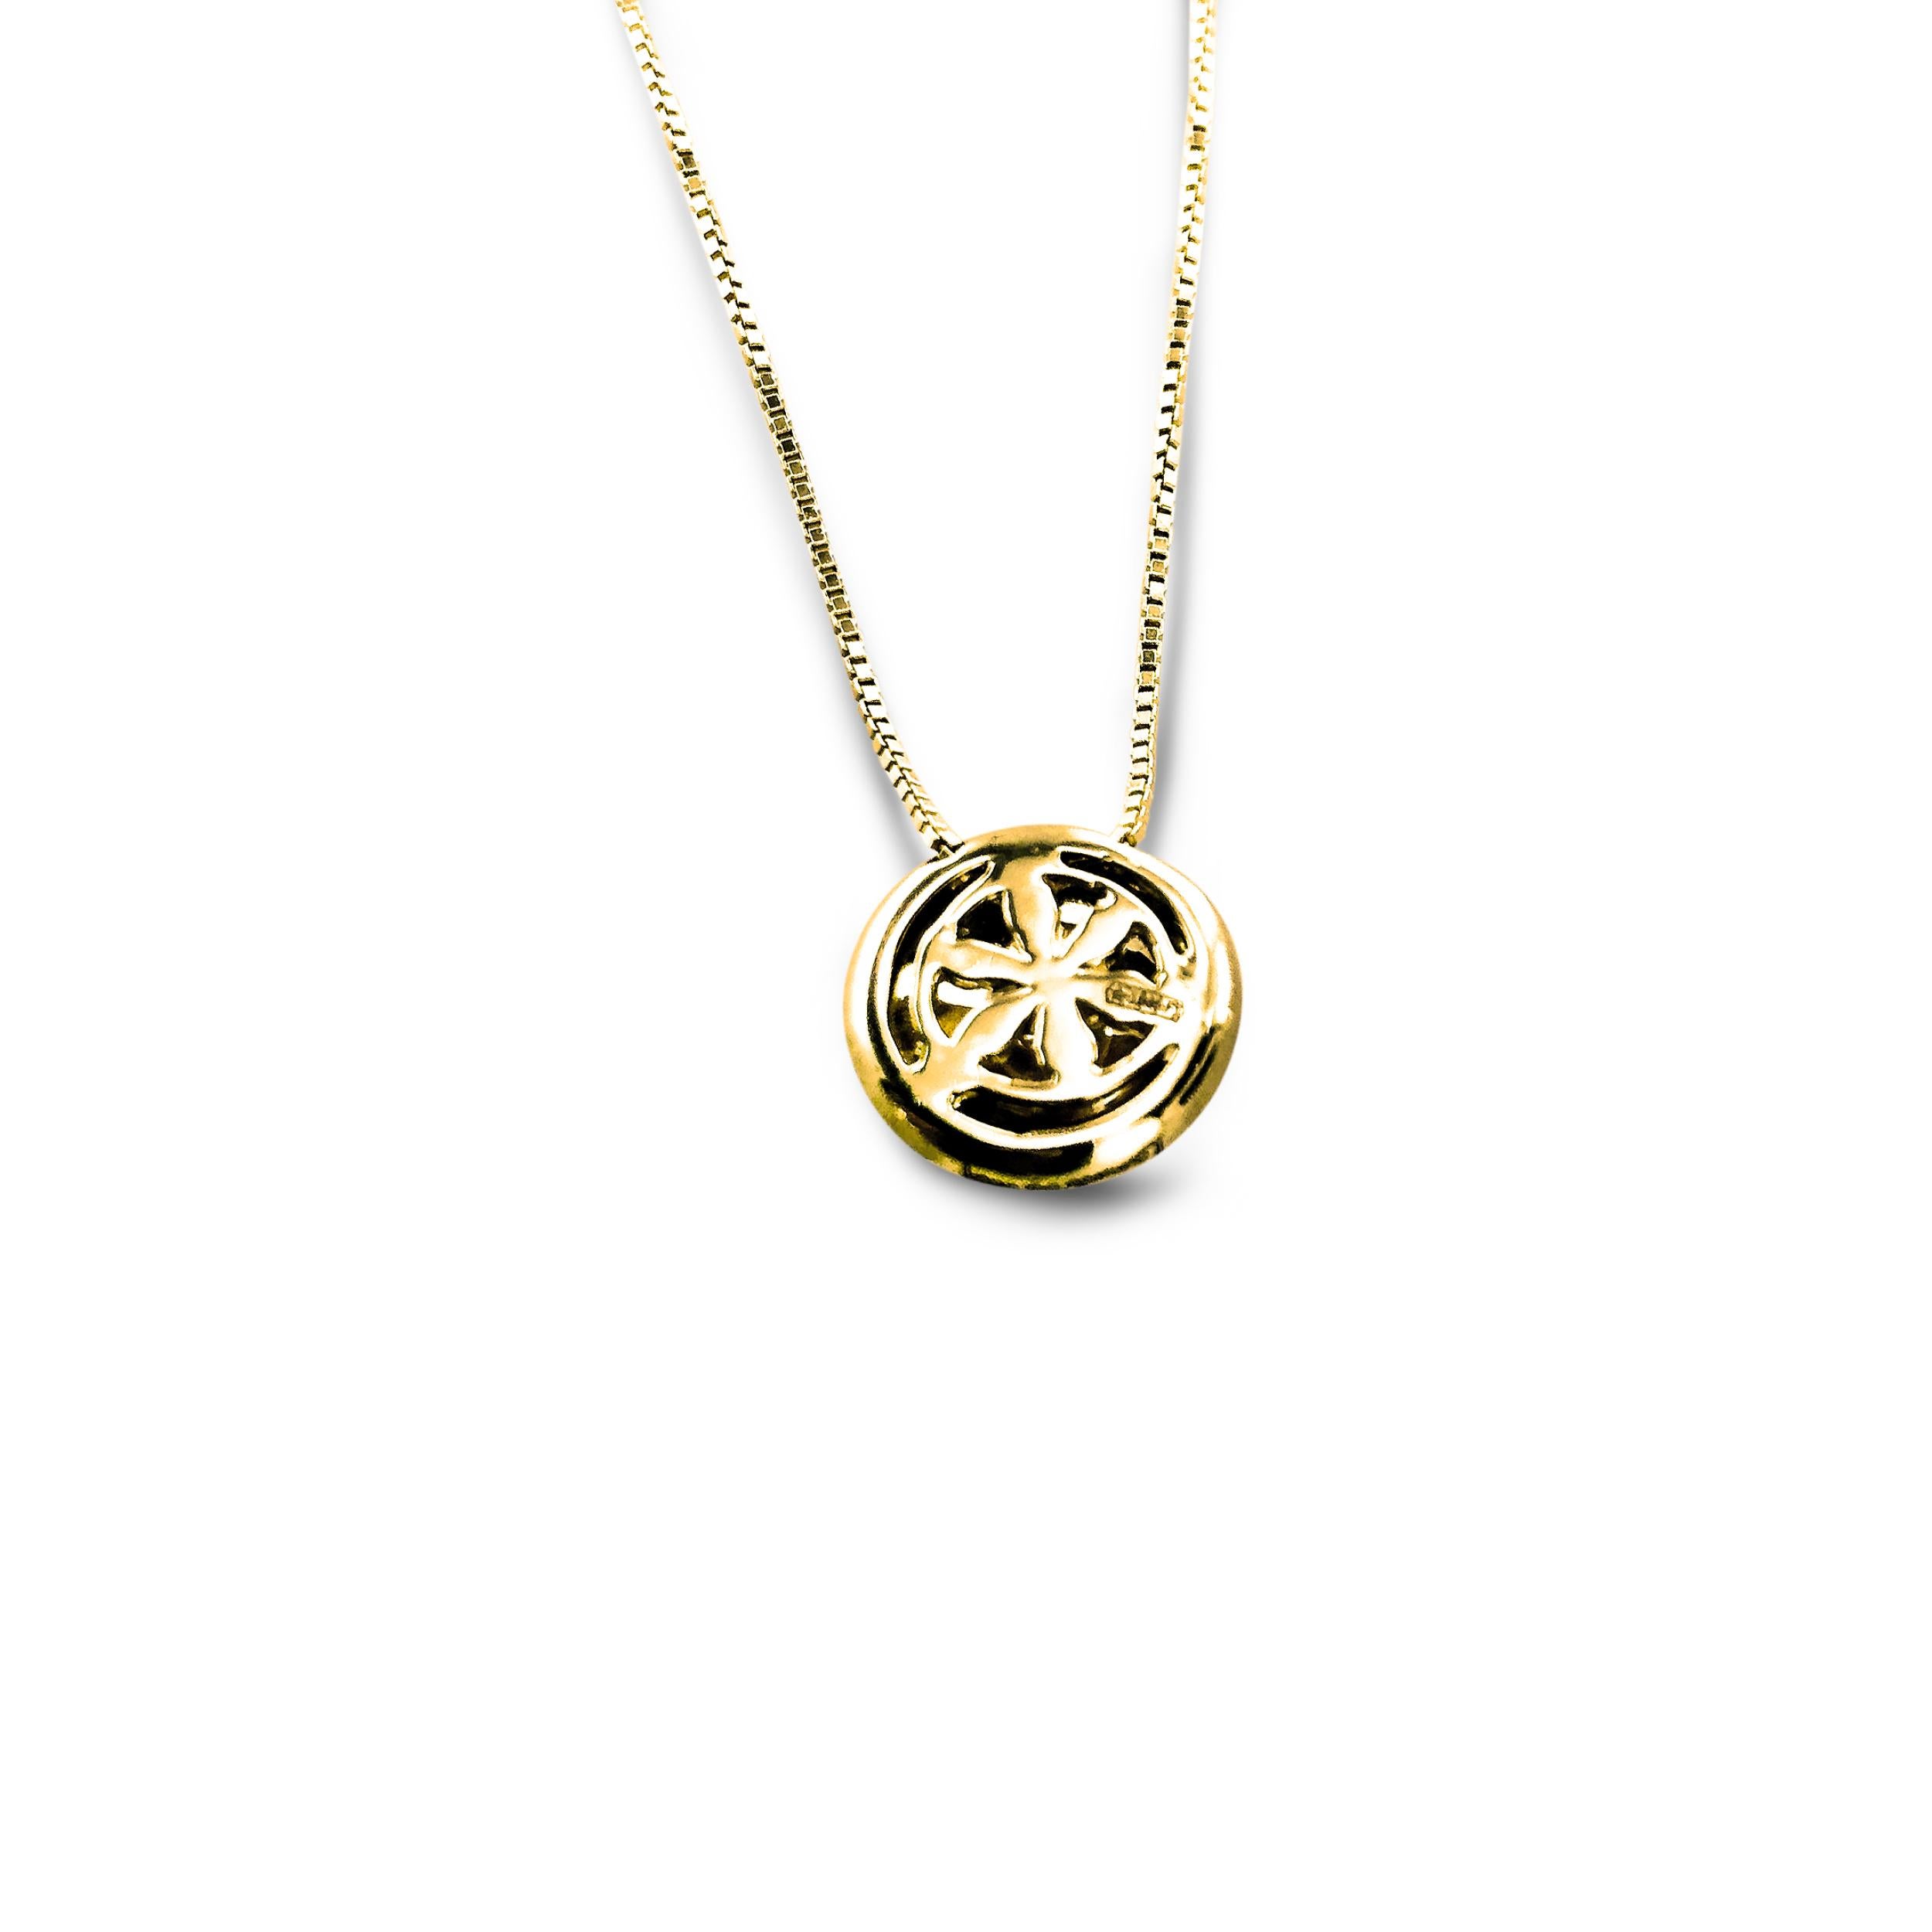 This yellow Gold 18Kt Caterina necklace, was designed and inspired by Leonardo da Vinci's architectural drawings.

The circular pendant is decorated with one white Gold star in the centre and his internationally patented Leonardo da Vinci Cut